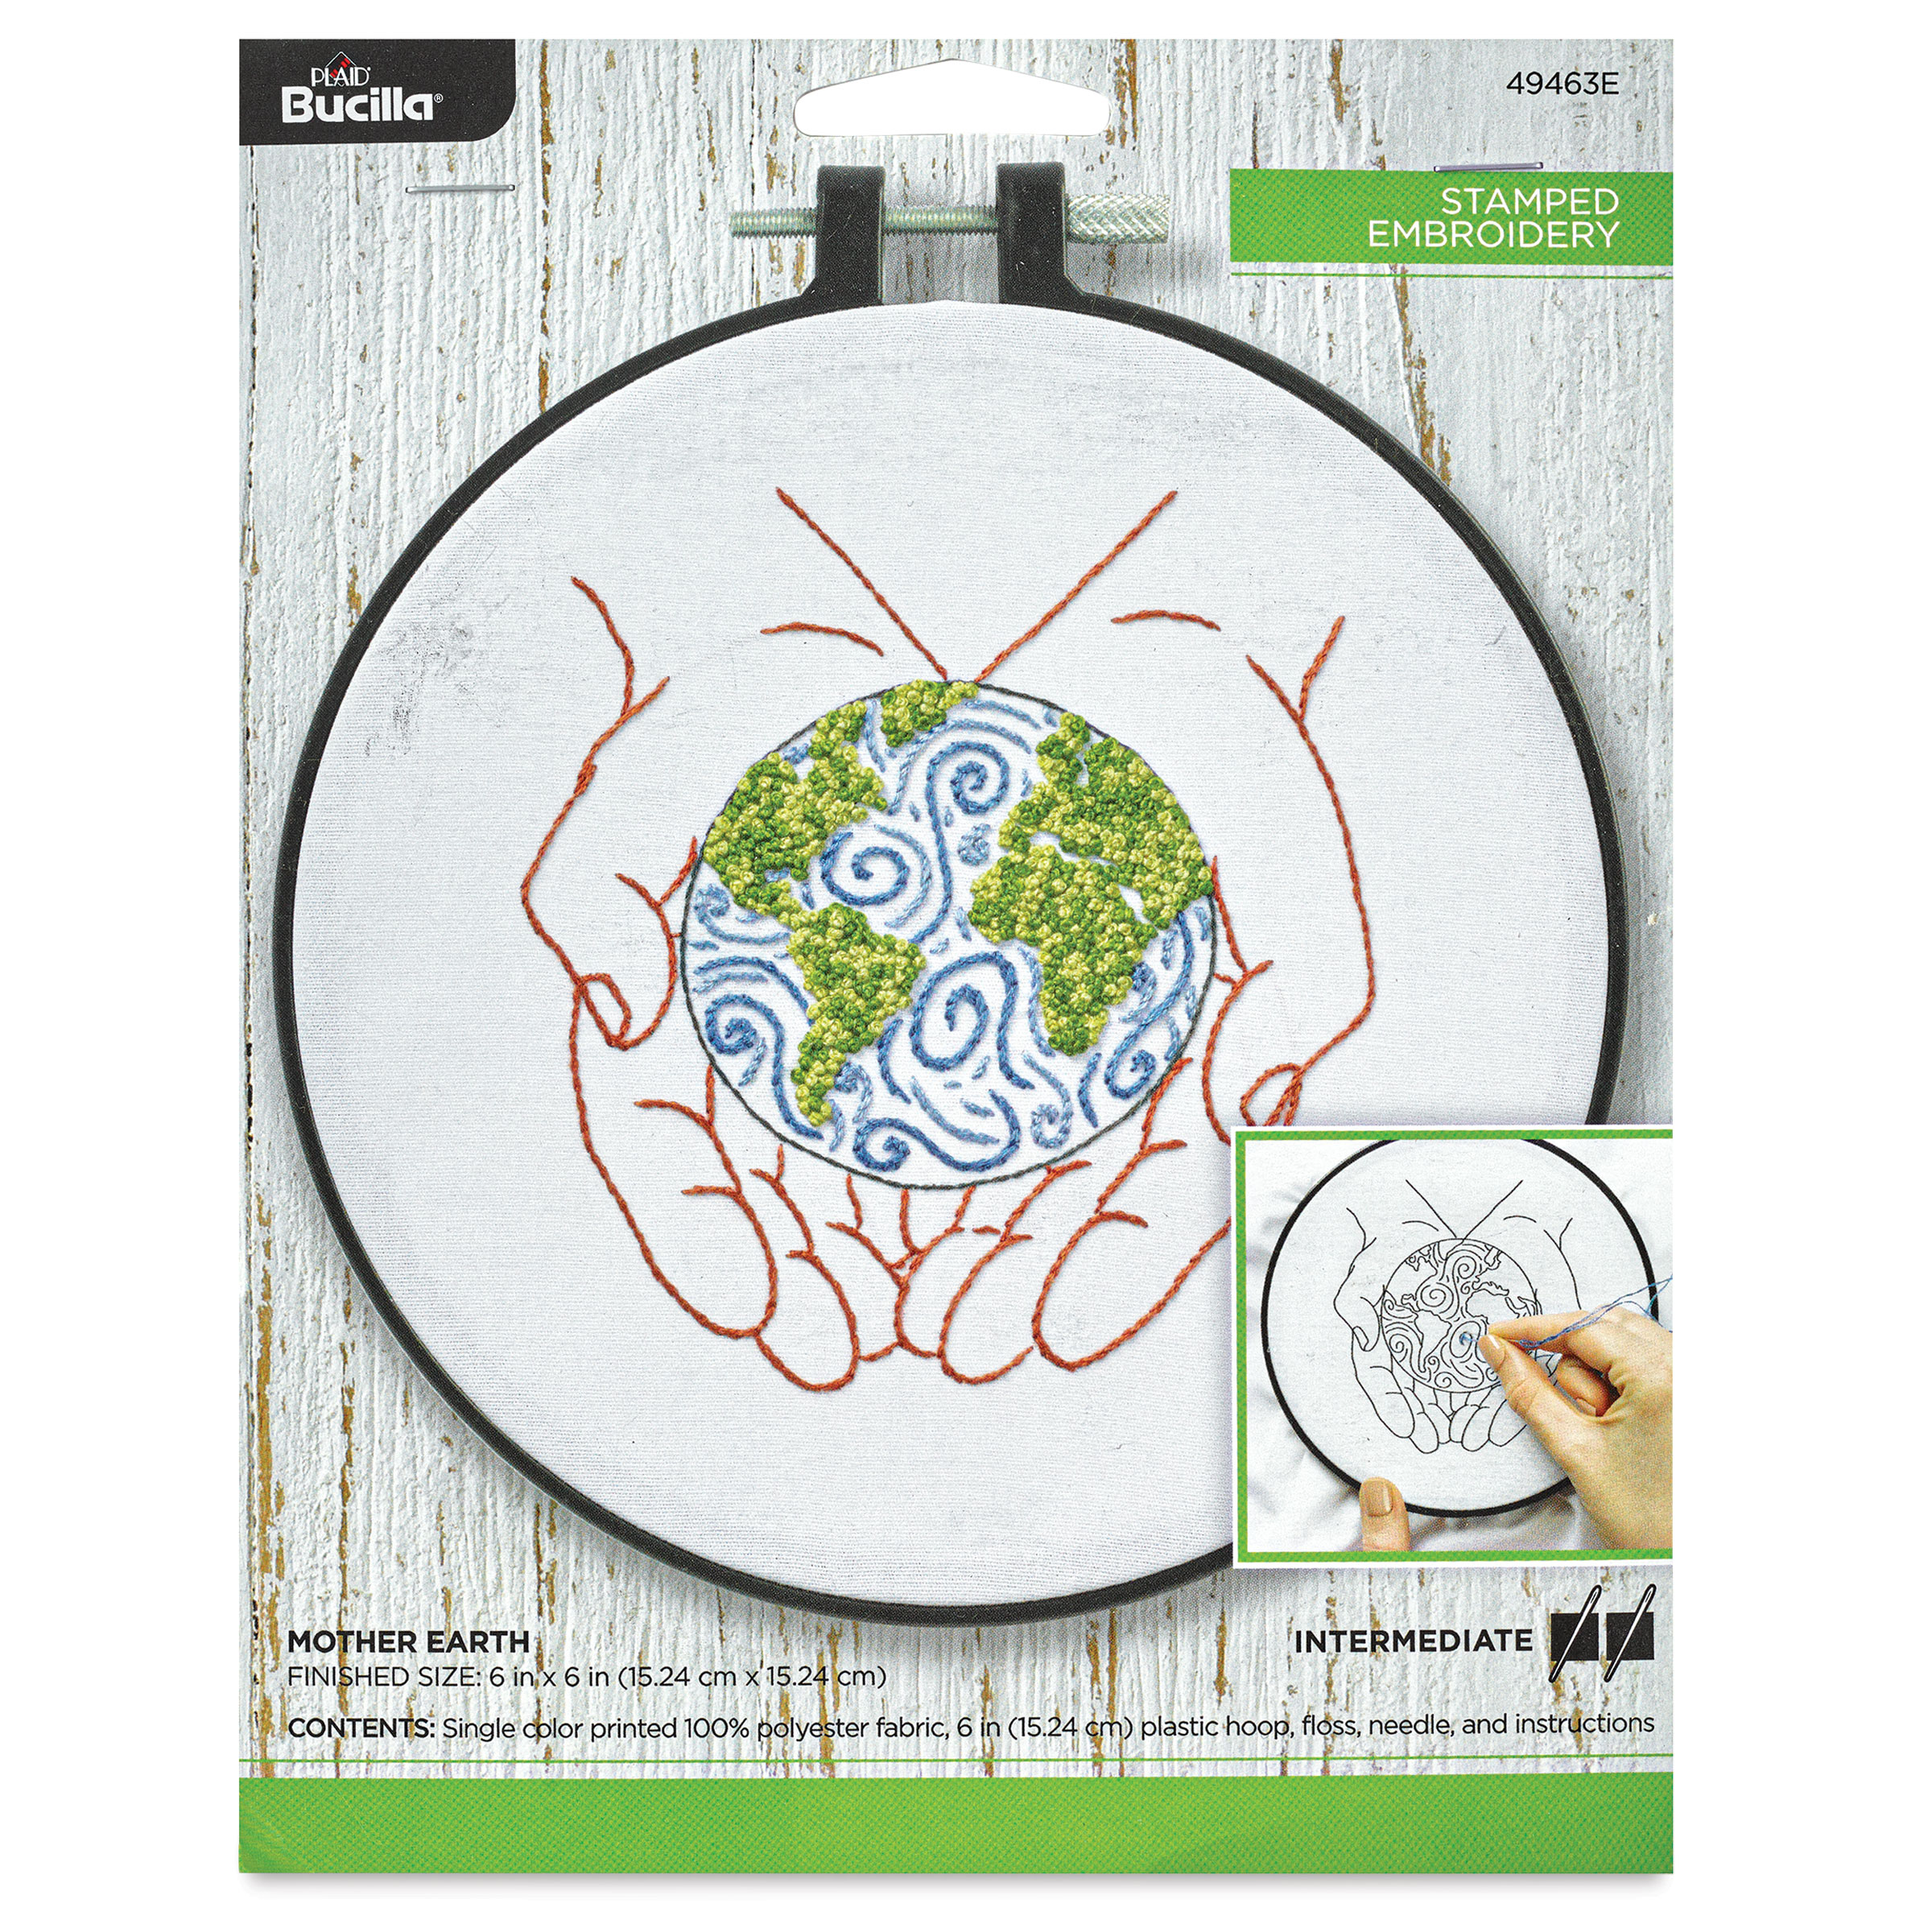 Bucilla Stamped Embroidery - Mother Earth - 49463E